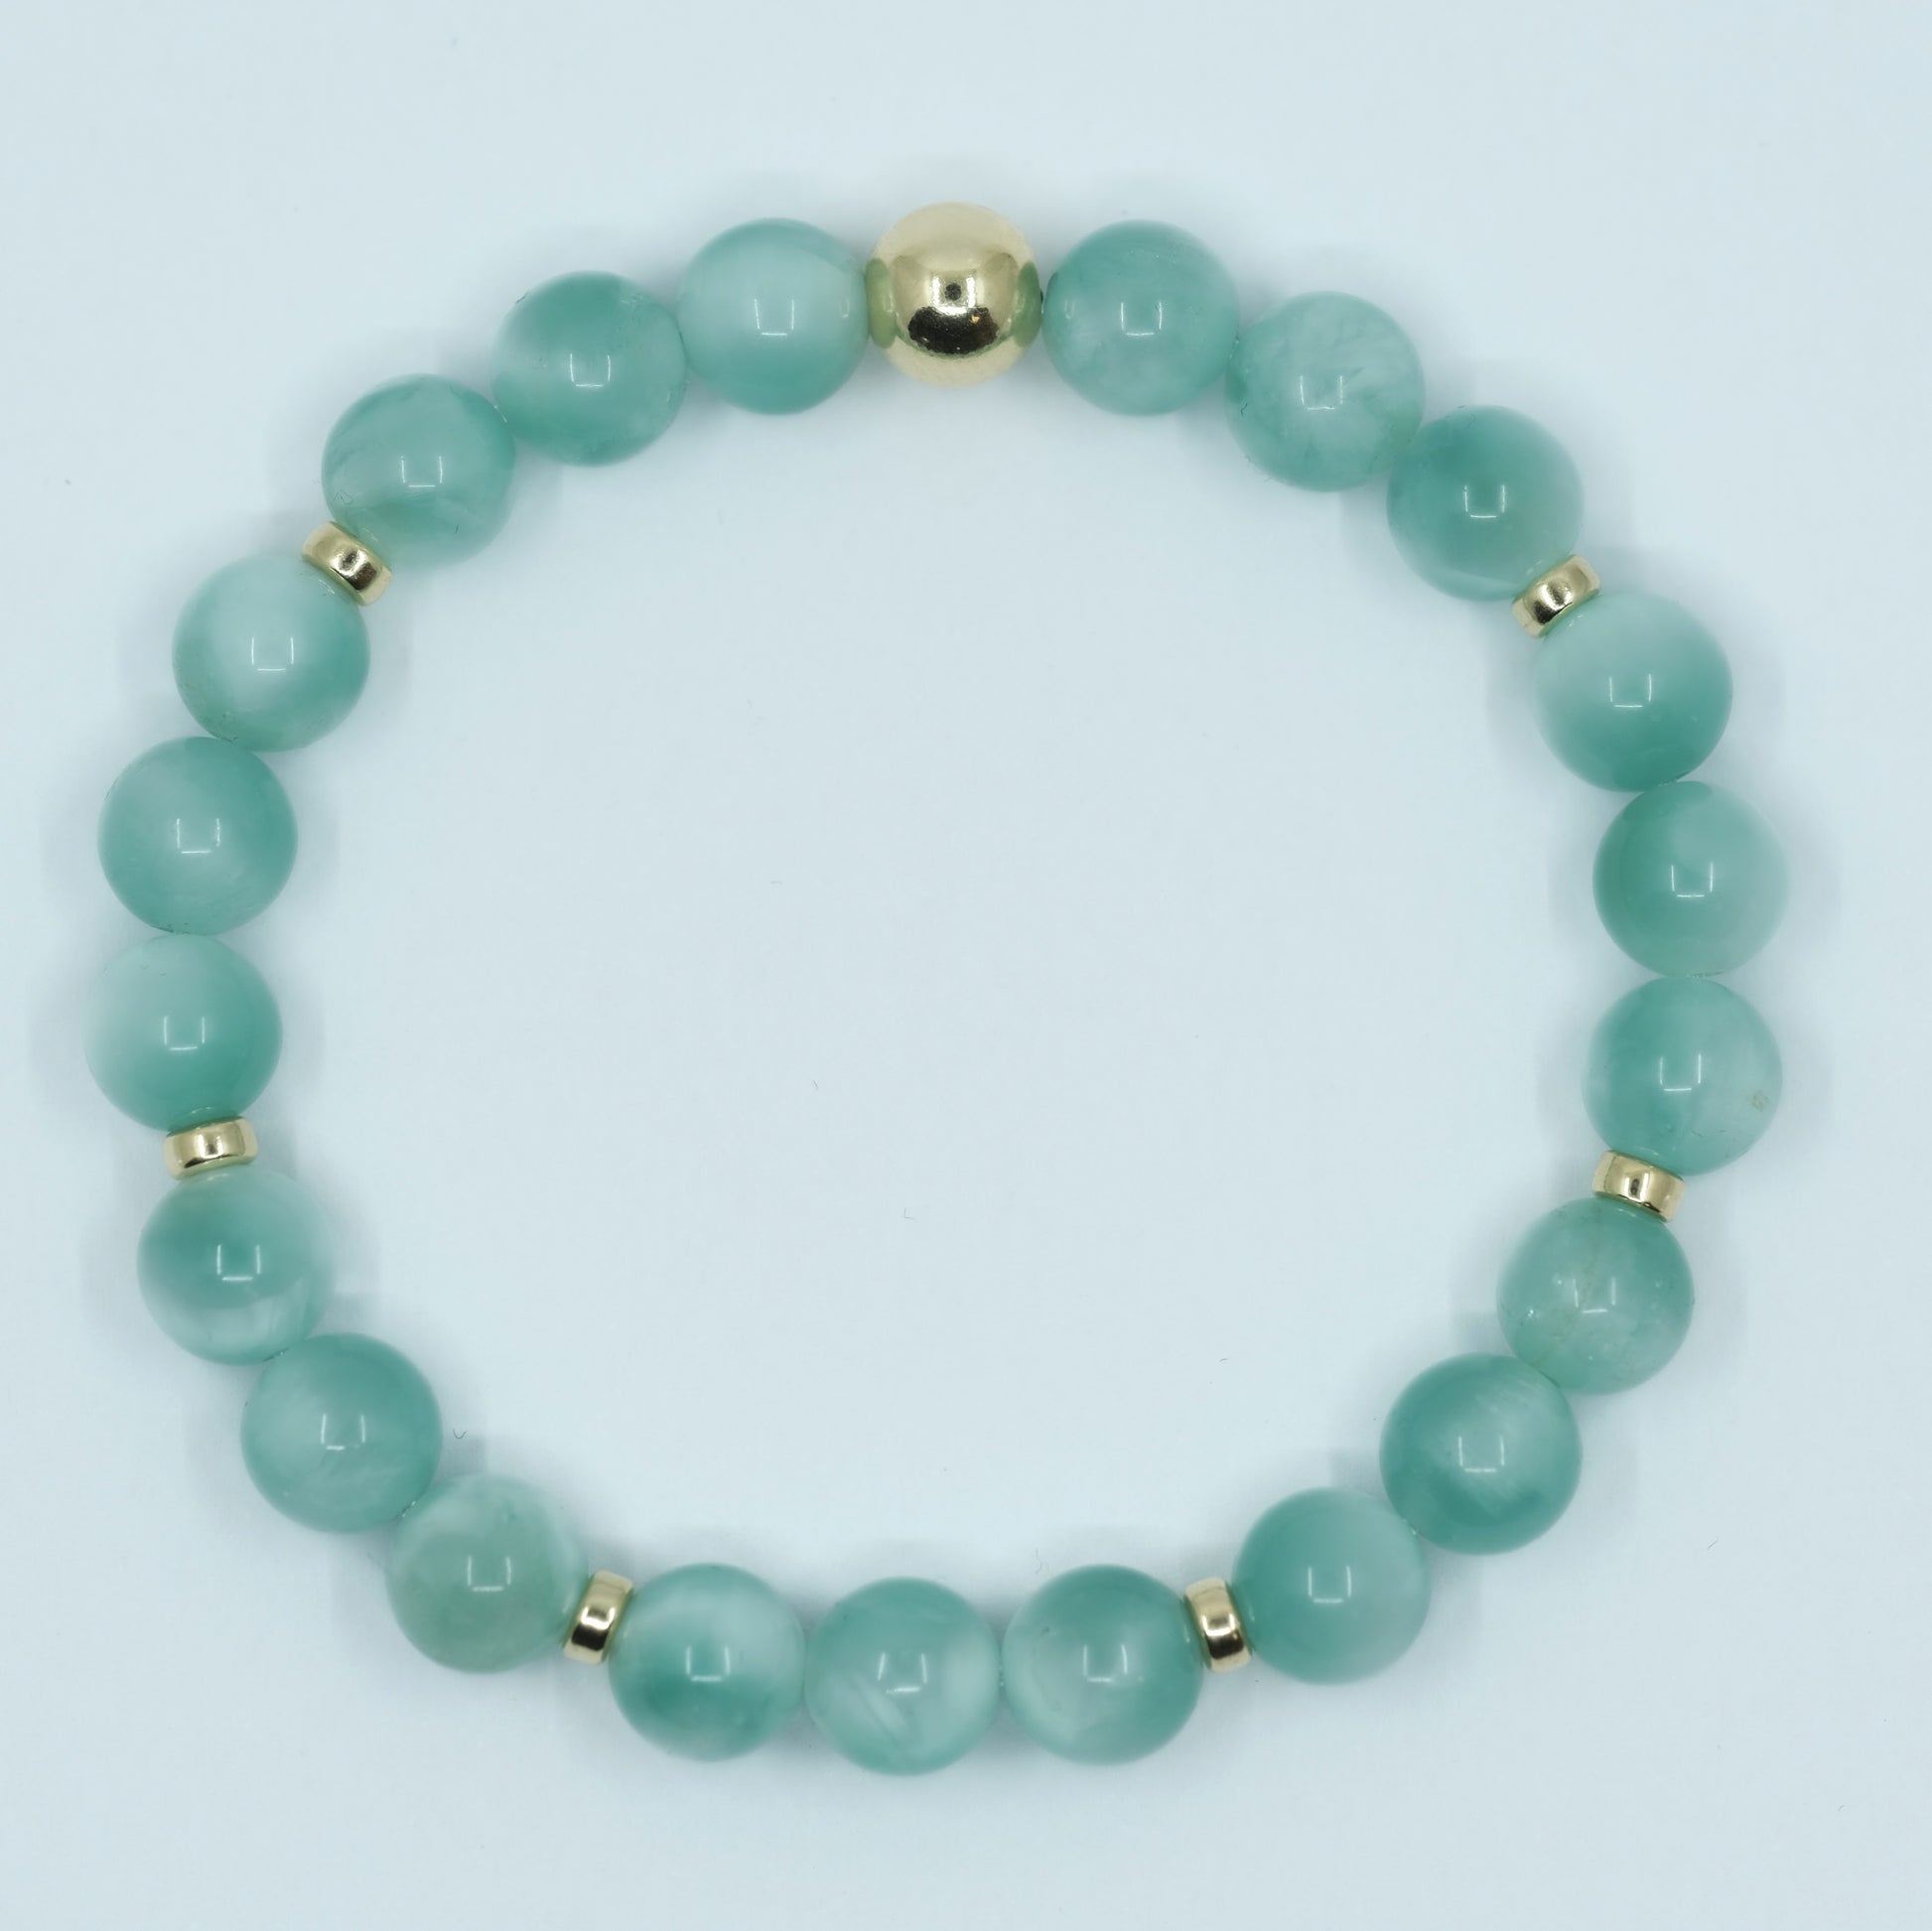 Green Moonstone gemstone bracelet with gold accents from above